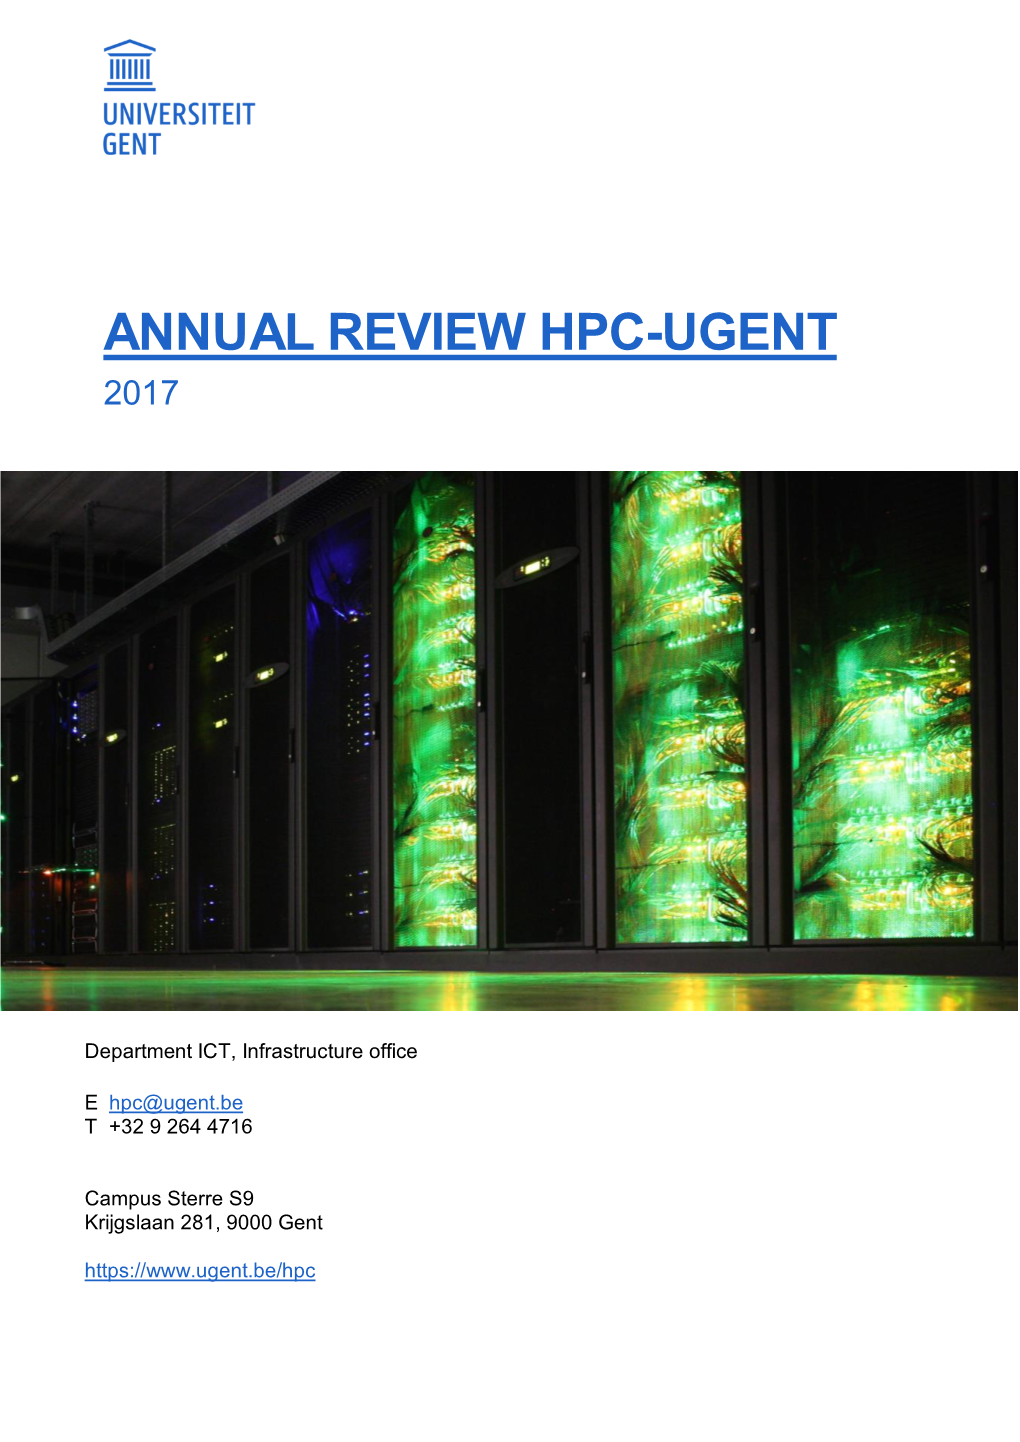 Annual Review Hpc-Ugent 2017